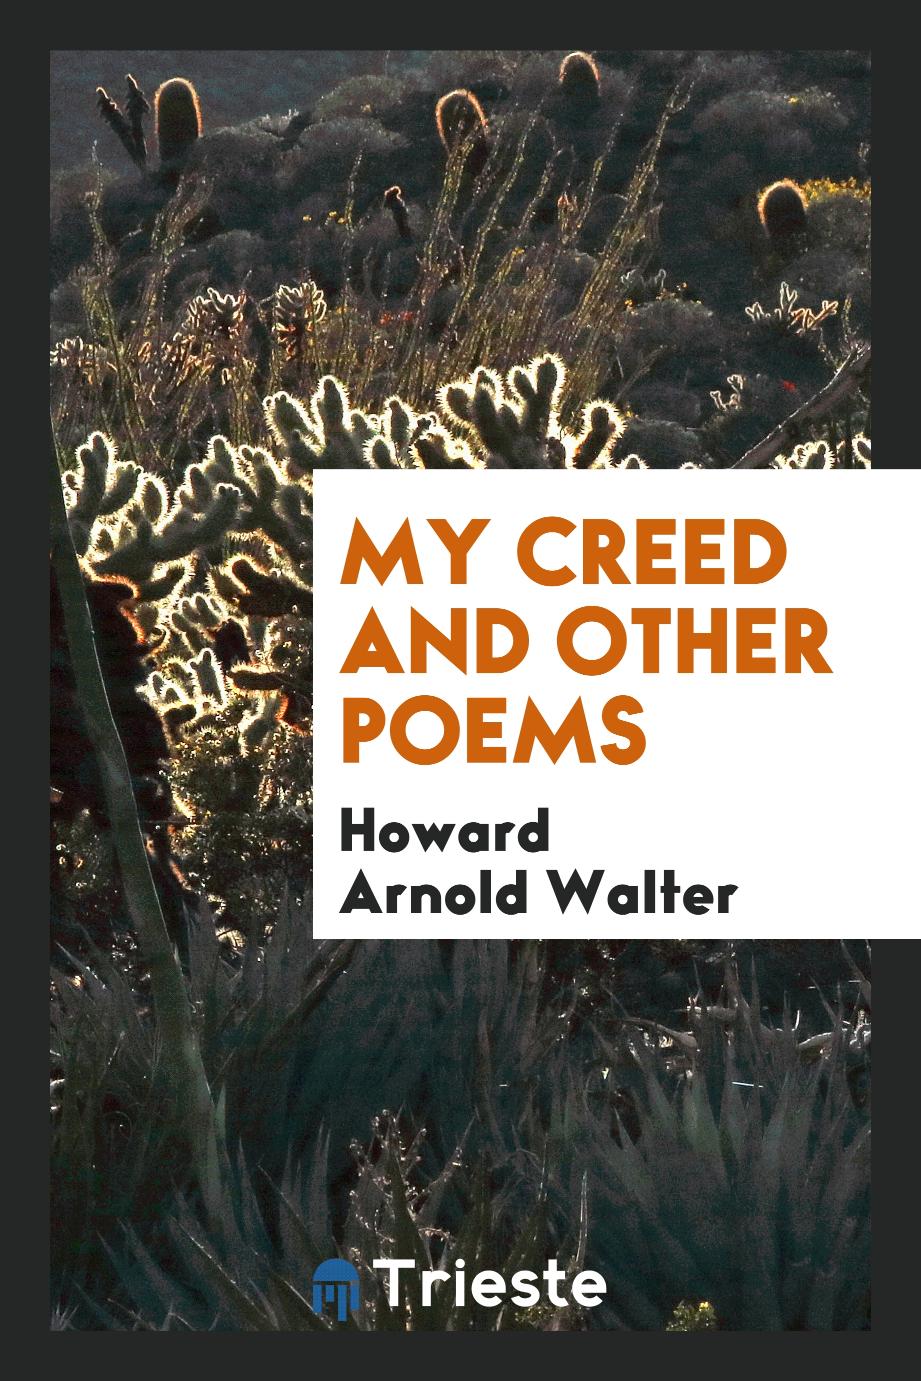 My Creed and Other Poems